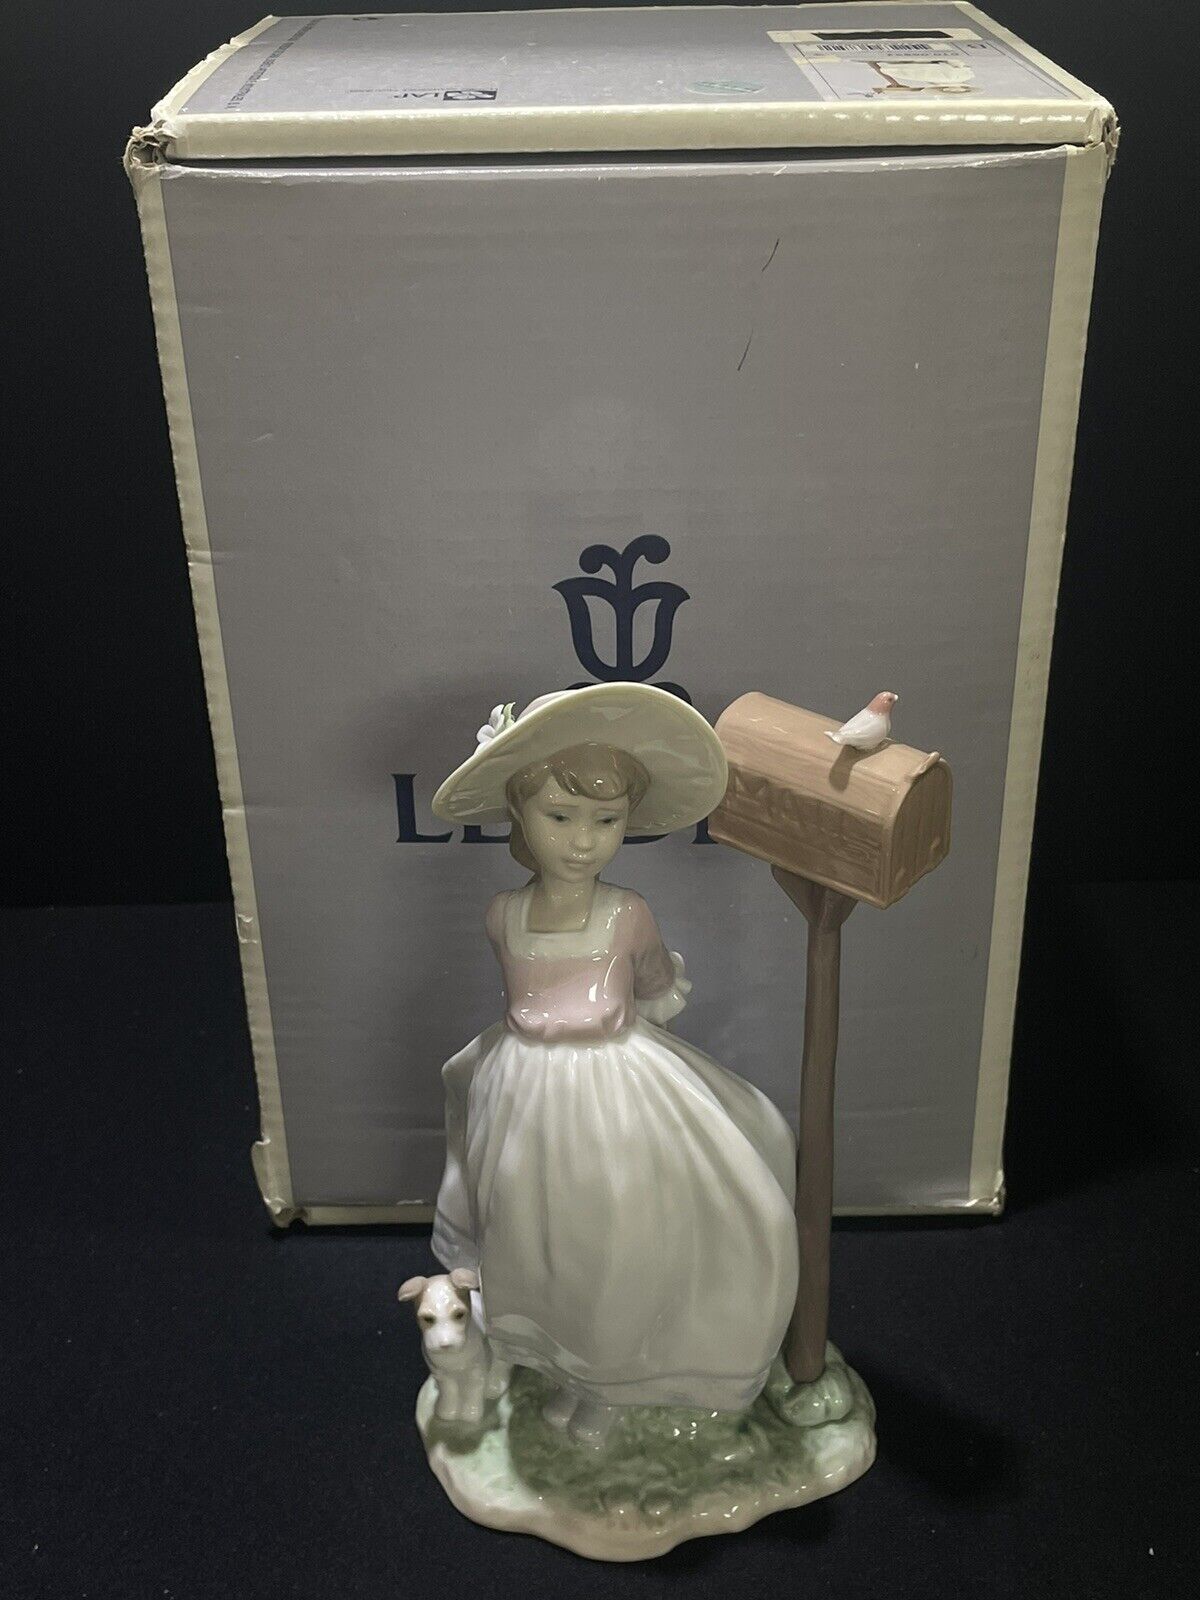 Lladro 6852 Waiting for your Letter Porcelain Figurine w/ Box